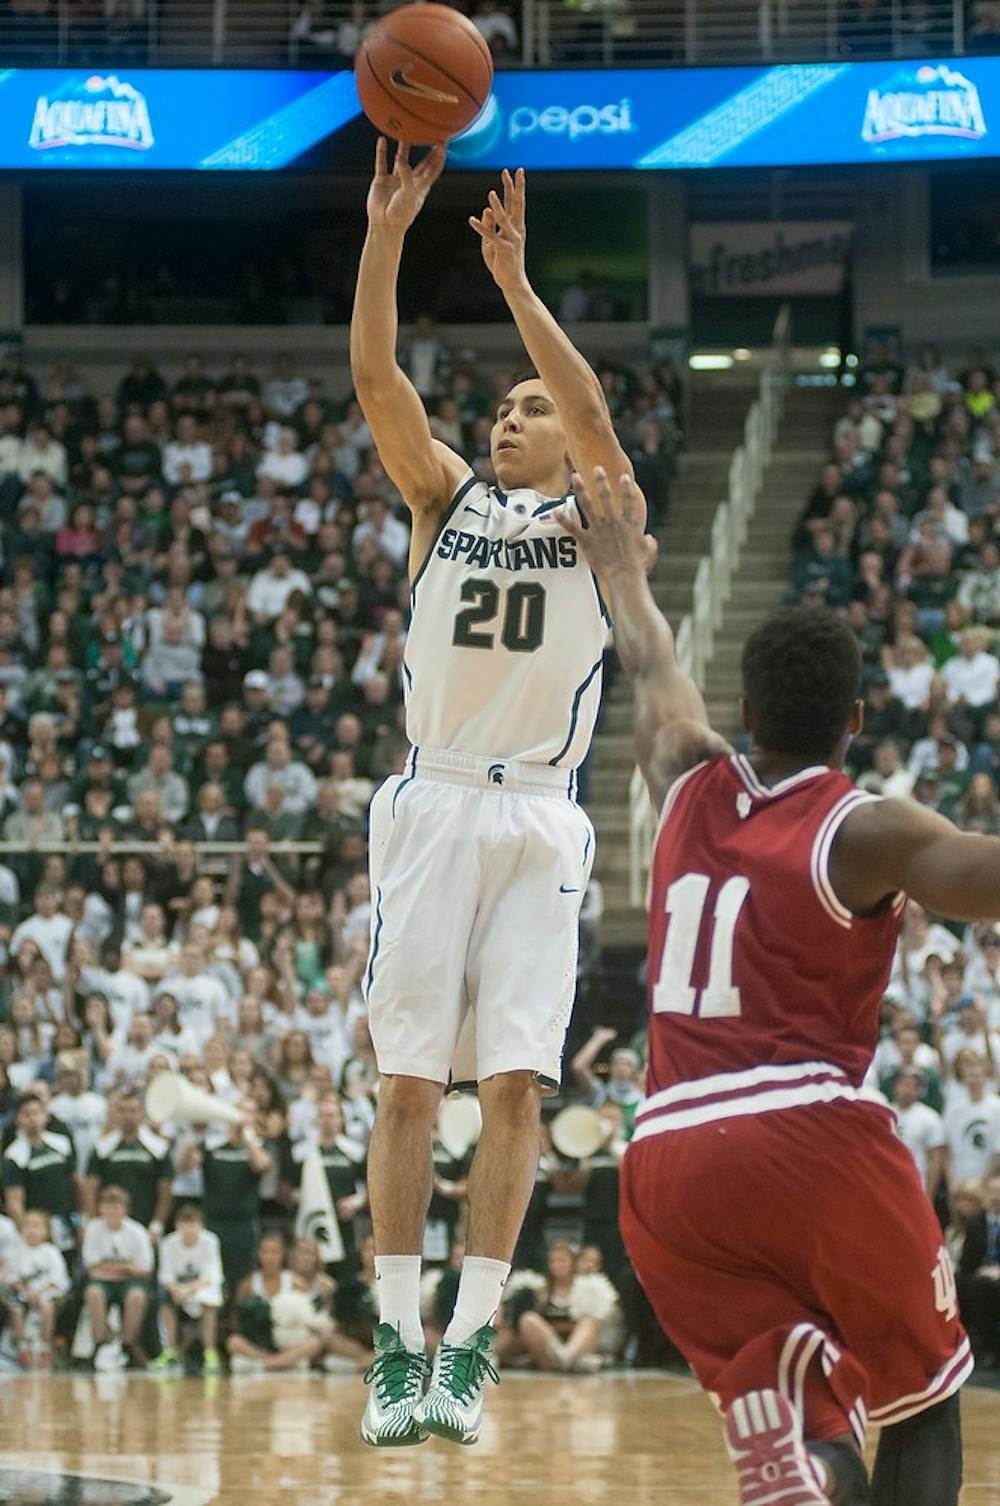 	<p>Junior guard Travis Trice shoots a three-pointer during the game against Indiana on Jan. 21, 2014. <span class="caps">MSU</span> beat Indiana, 71-66. Julia Nagy/The State News</p>